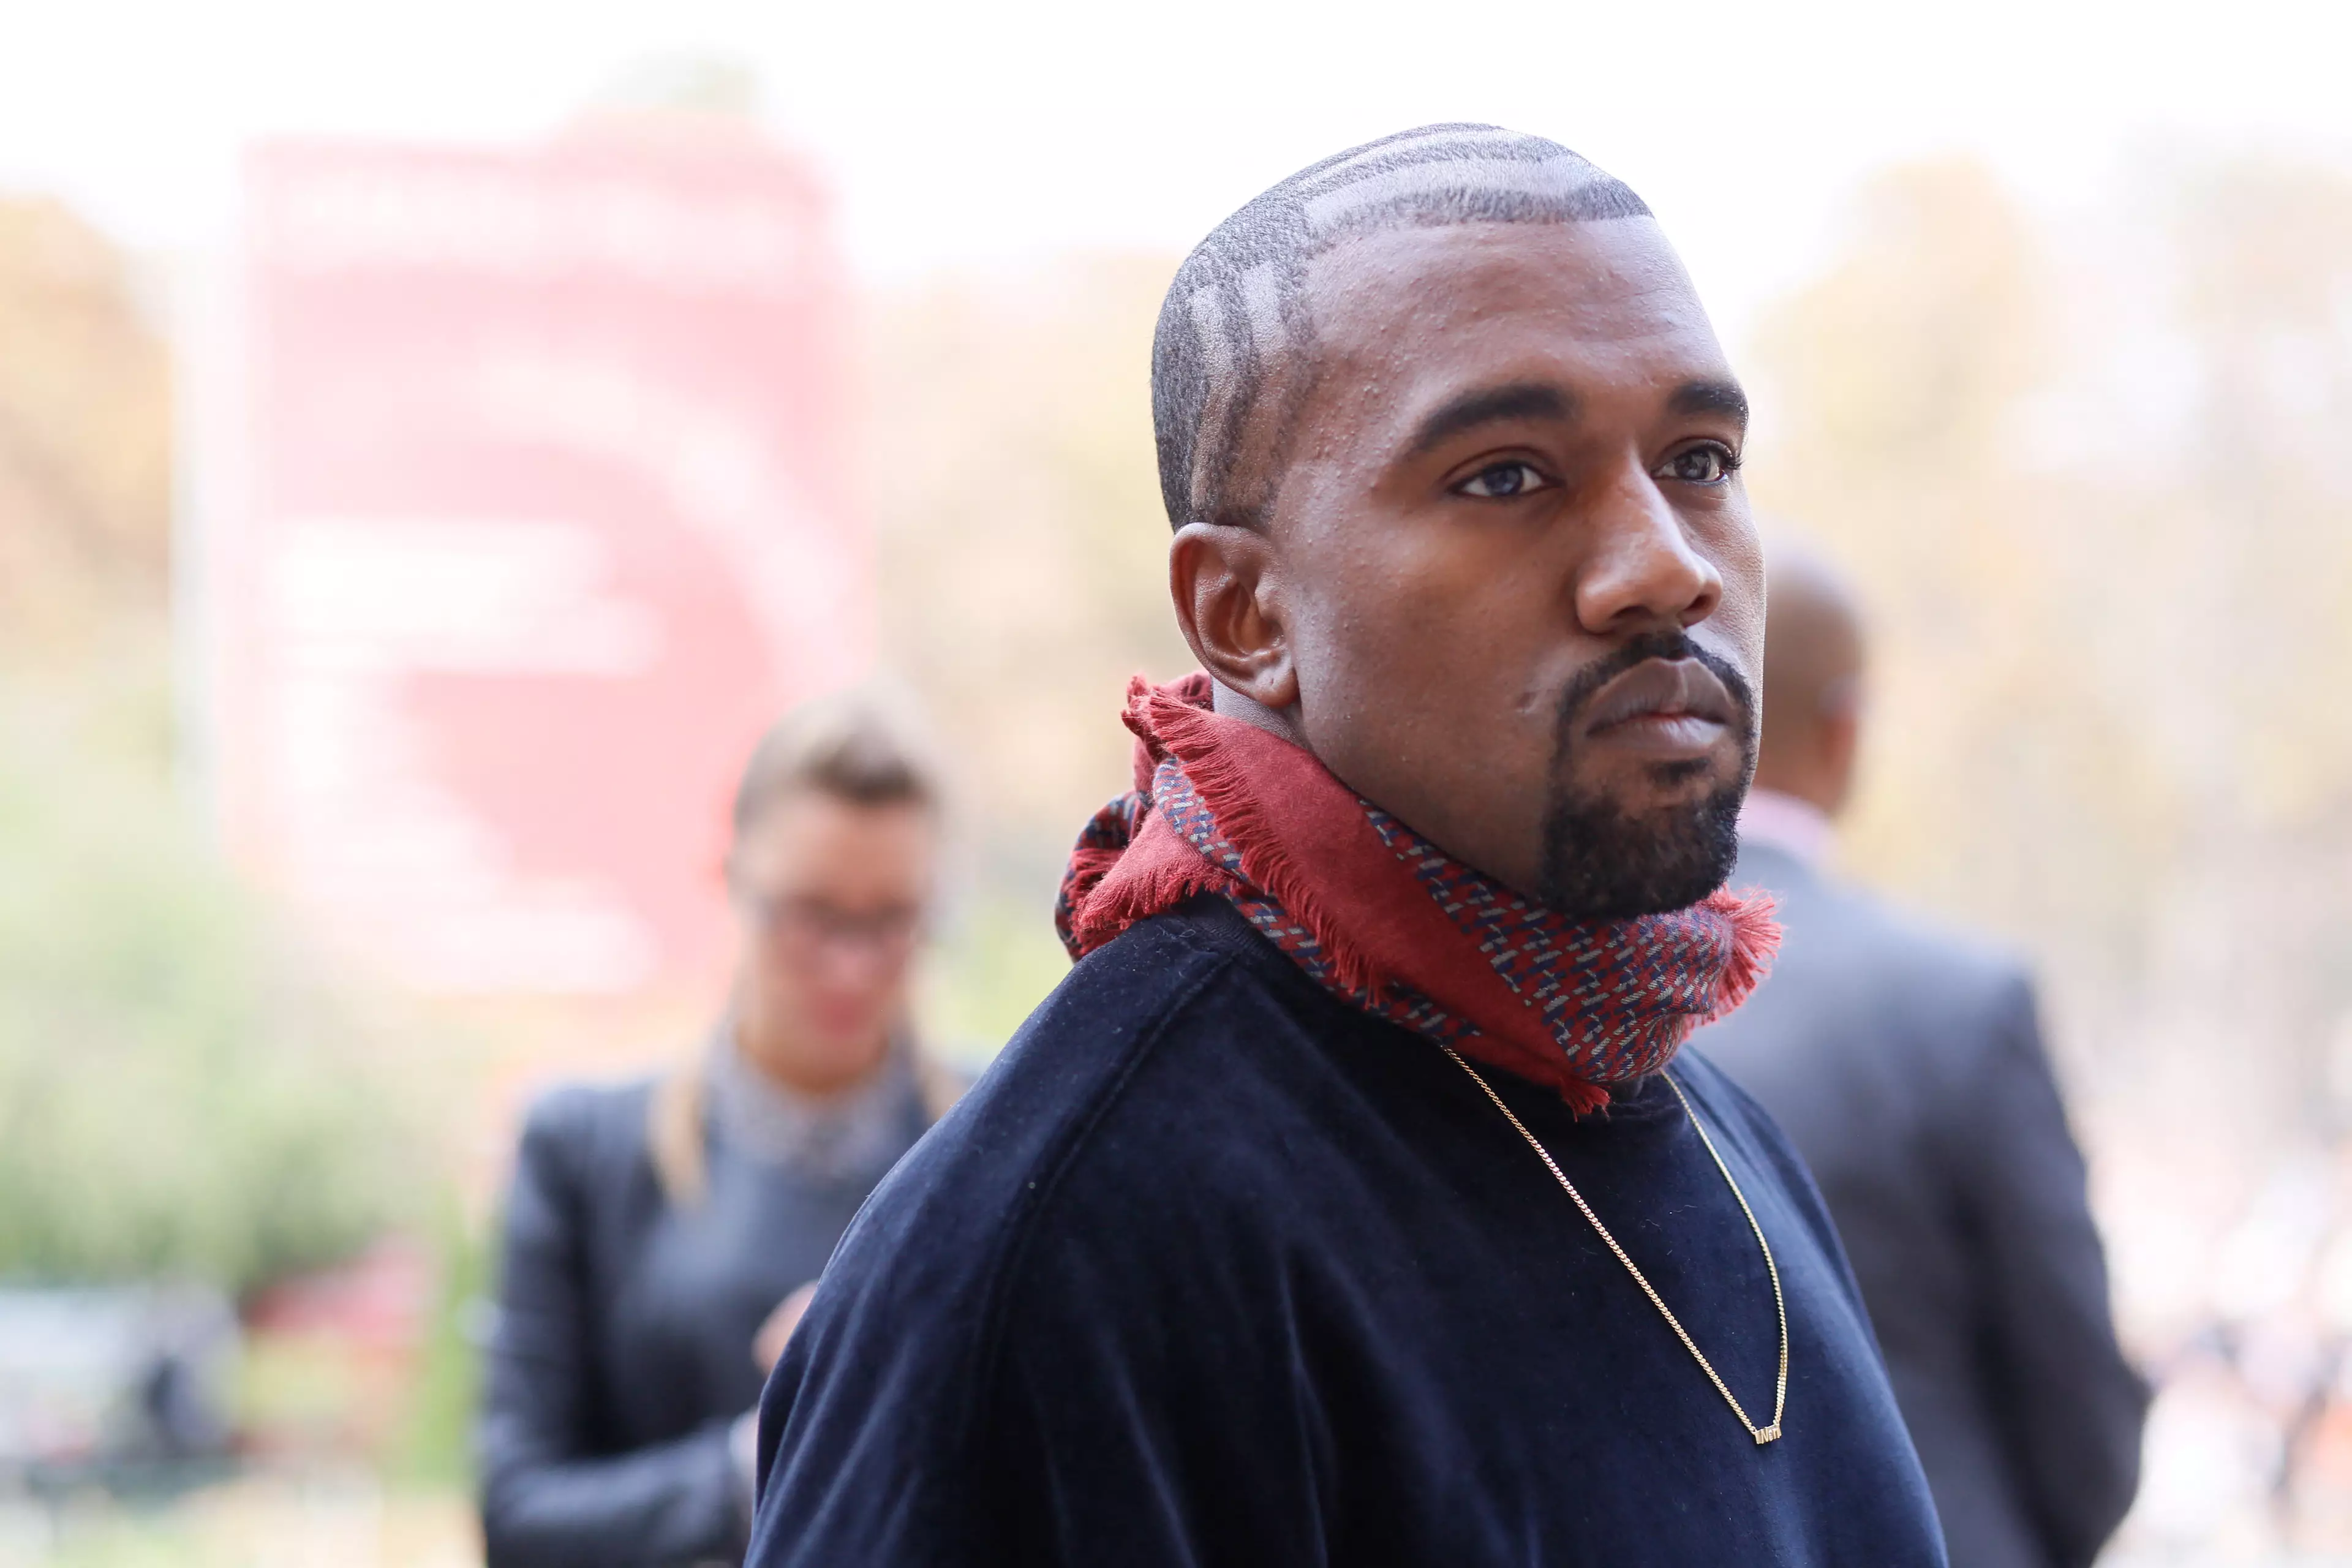 Kanye West has conceded defeat in the US presidential election.